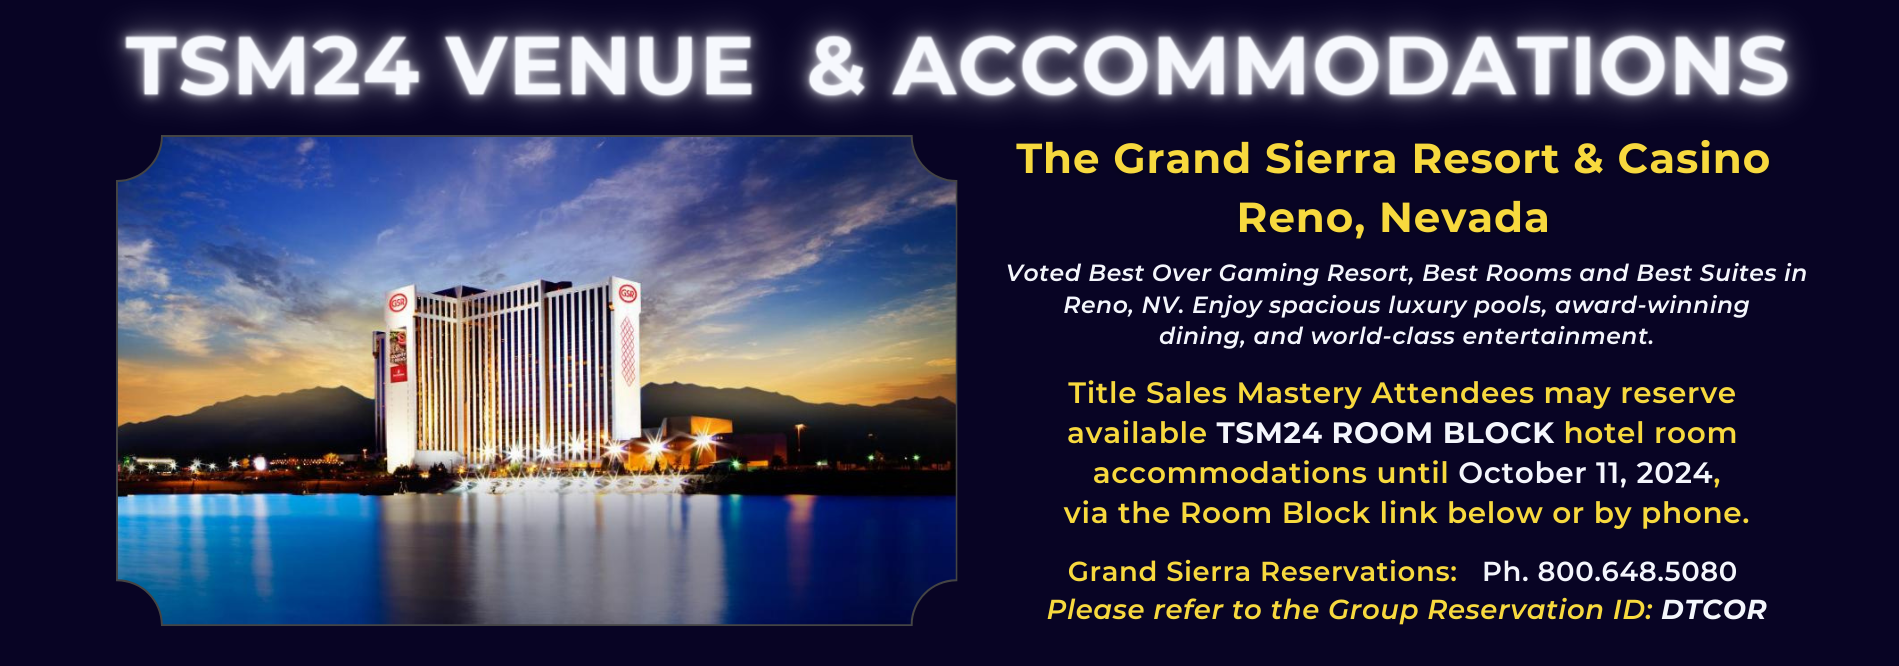 The Grand Sierra Resort & Casino Reno, Nevada Title Sales Mastery Attendees may reserve available TSM24 ROOM BLOCK hotel room accommodations until October 11, 2024, via the Room Block link below or by phone. Grand Sierra Reservations: Ph. 800.648.5080 Please refer to the Group Reservation ID: DTCOR